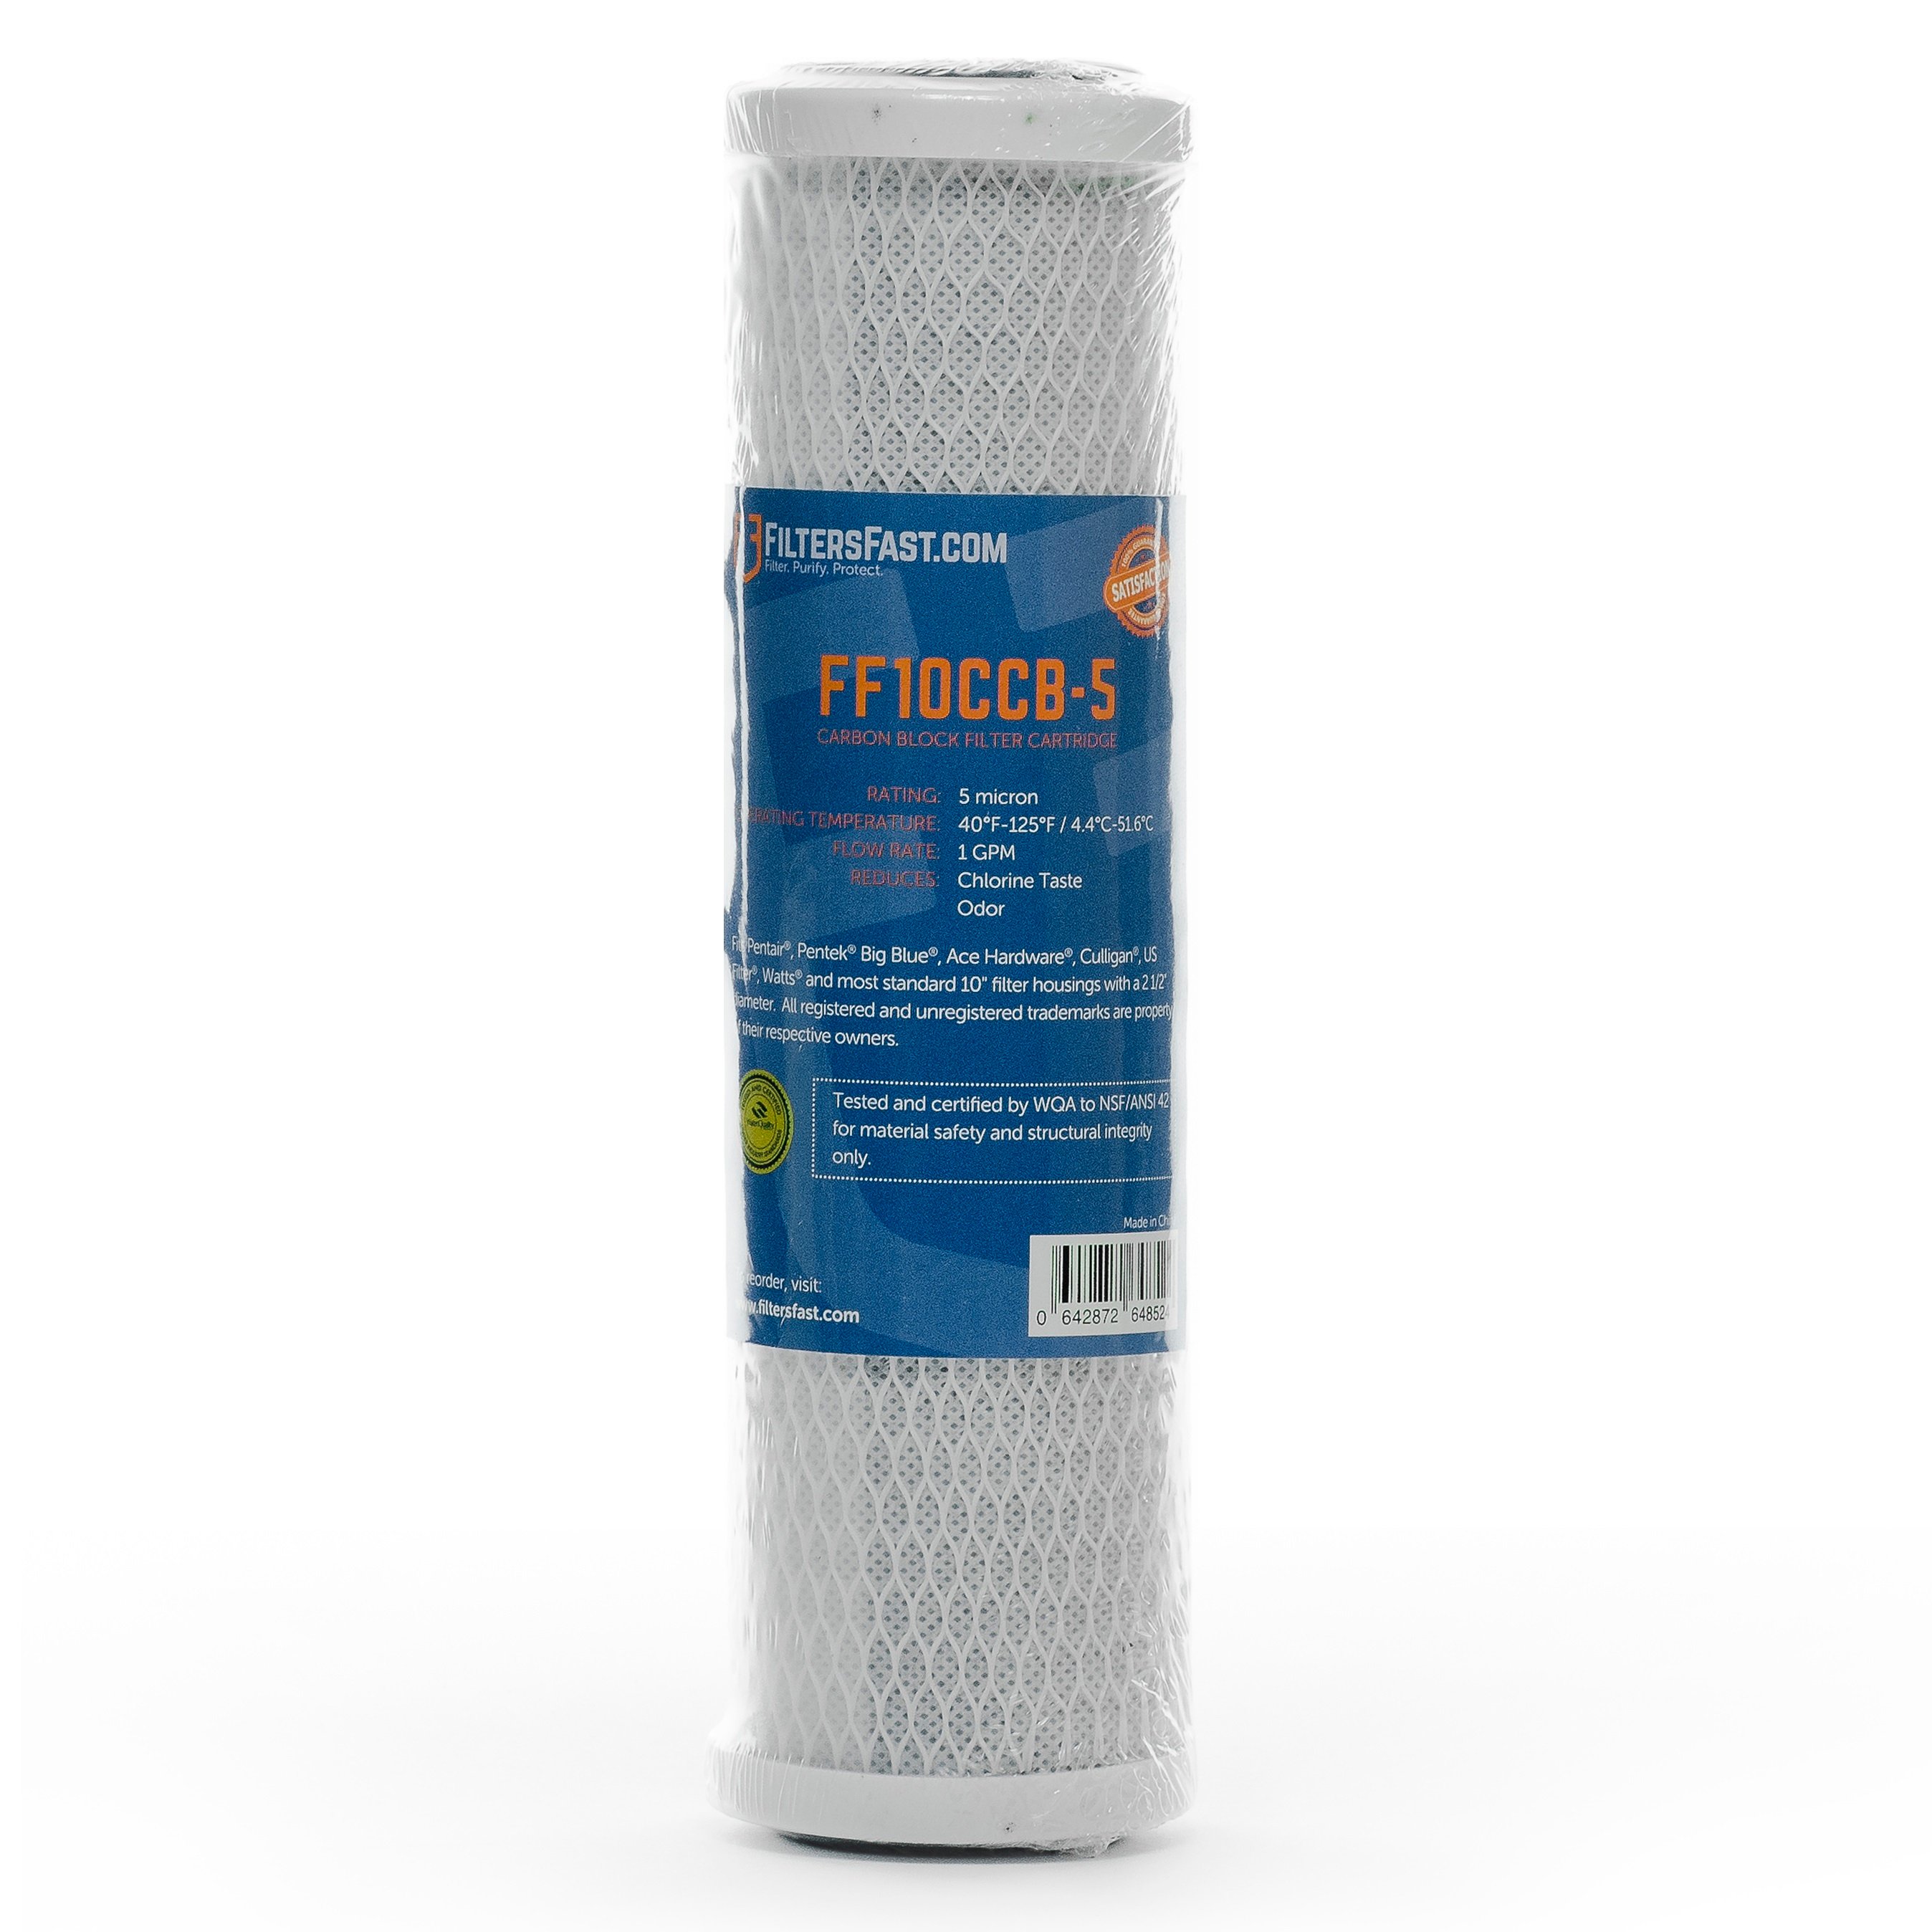 WCBCS975RV Carbon Block Water Filter Cartridge by CFS Compatible with Watts 2 